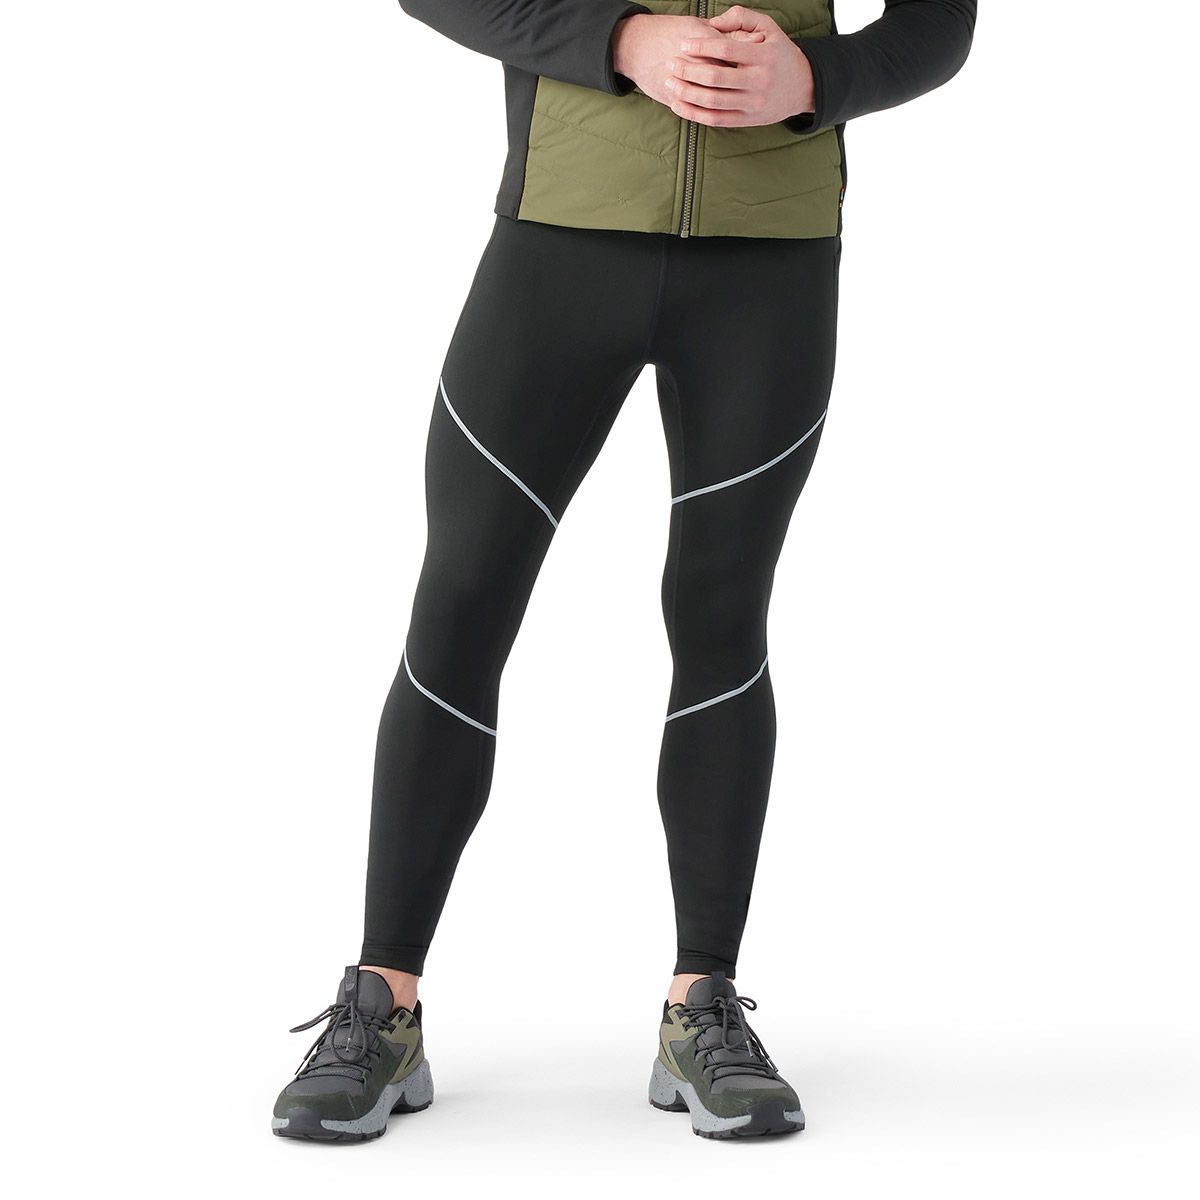 Men High Stretch Thermal Lined Sports Tights